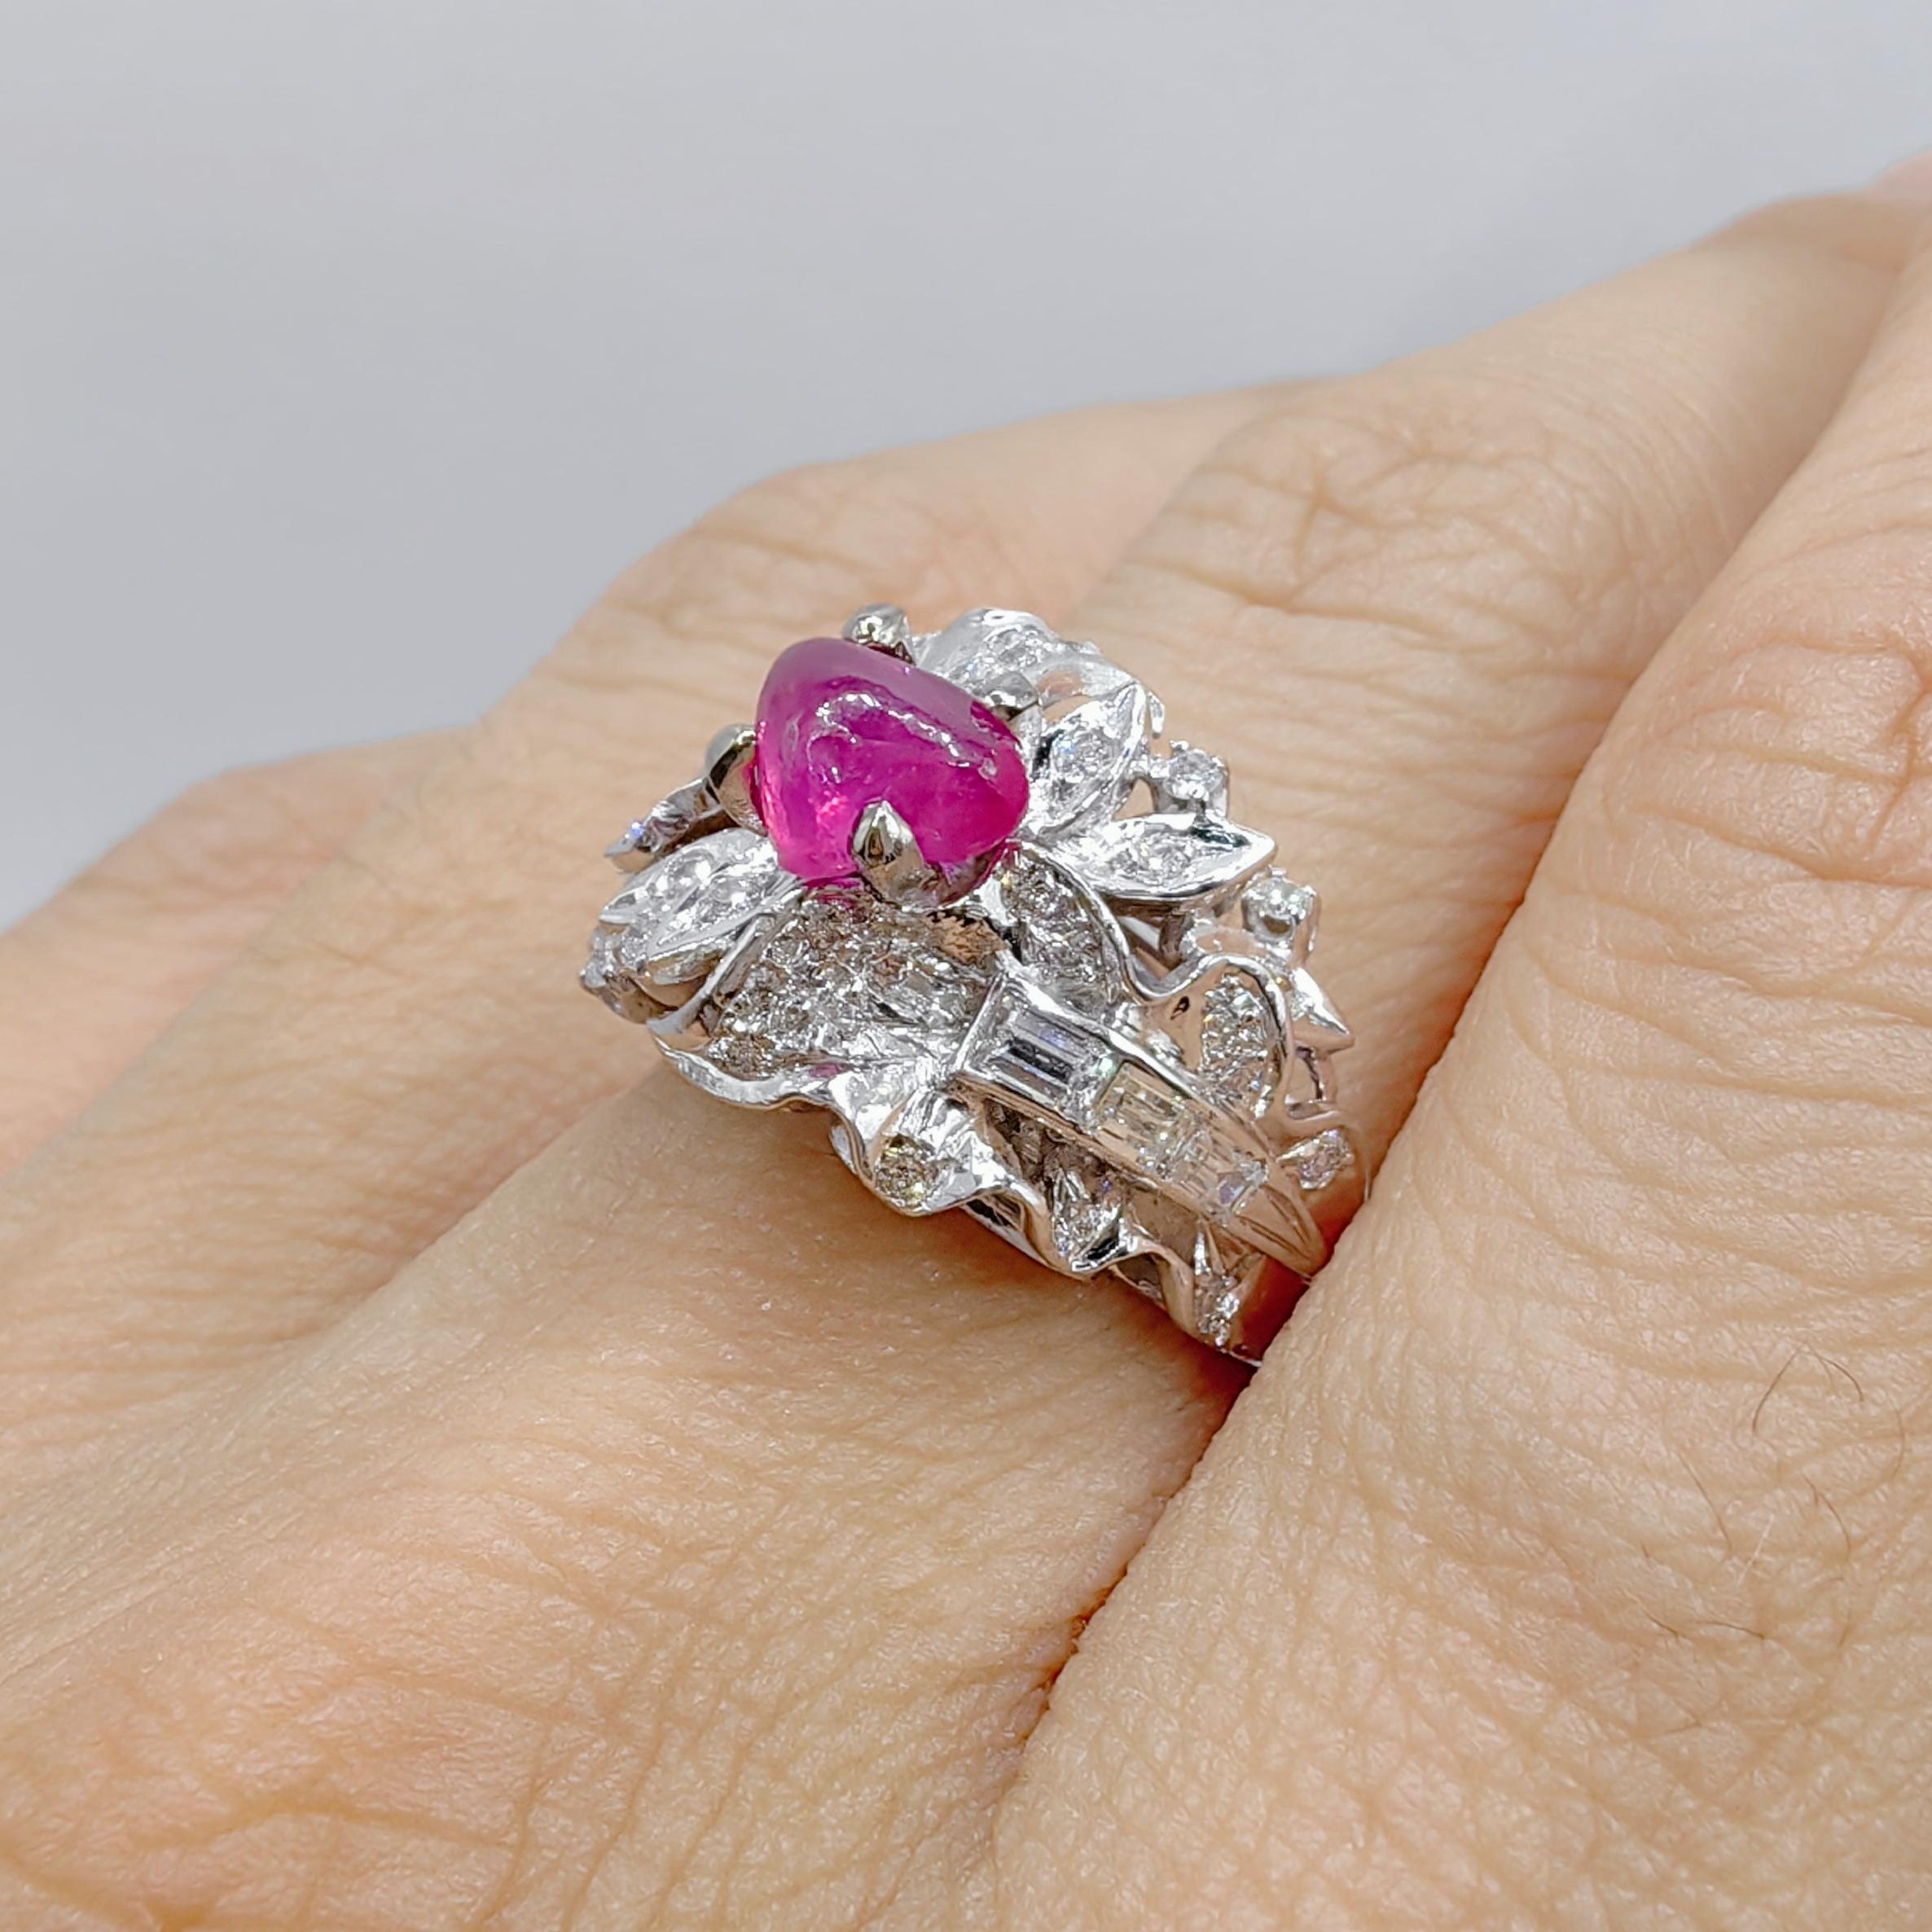 One-of-a-kind Vintage 1.52ct Freeform Ruby Edwardian Diamond Ring in Platinum For Sale 3